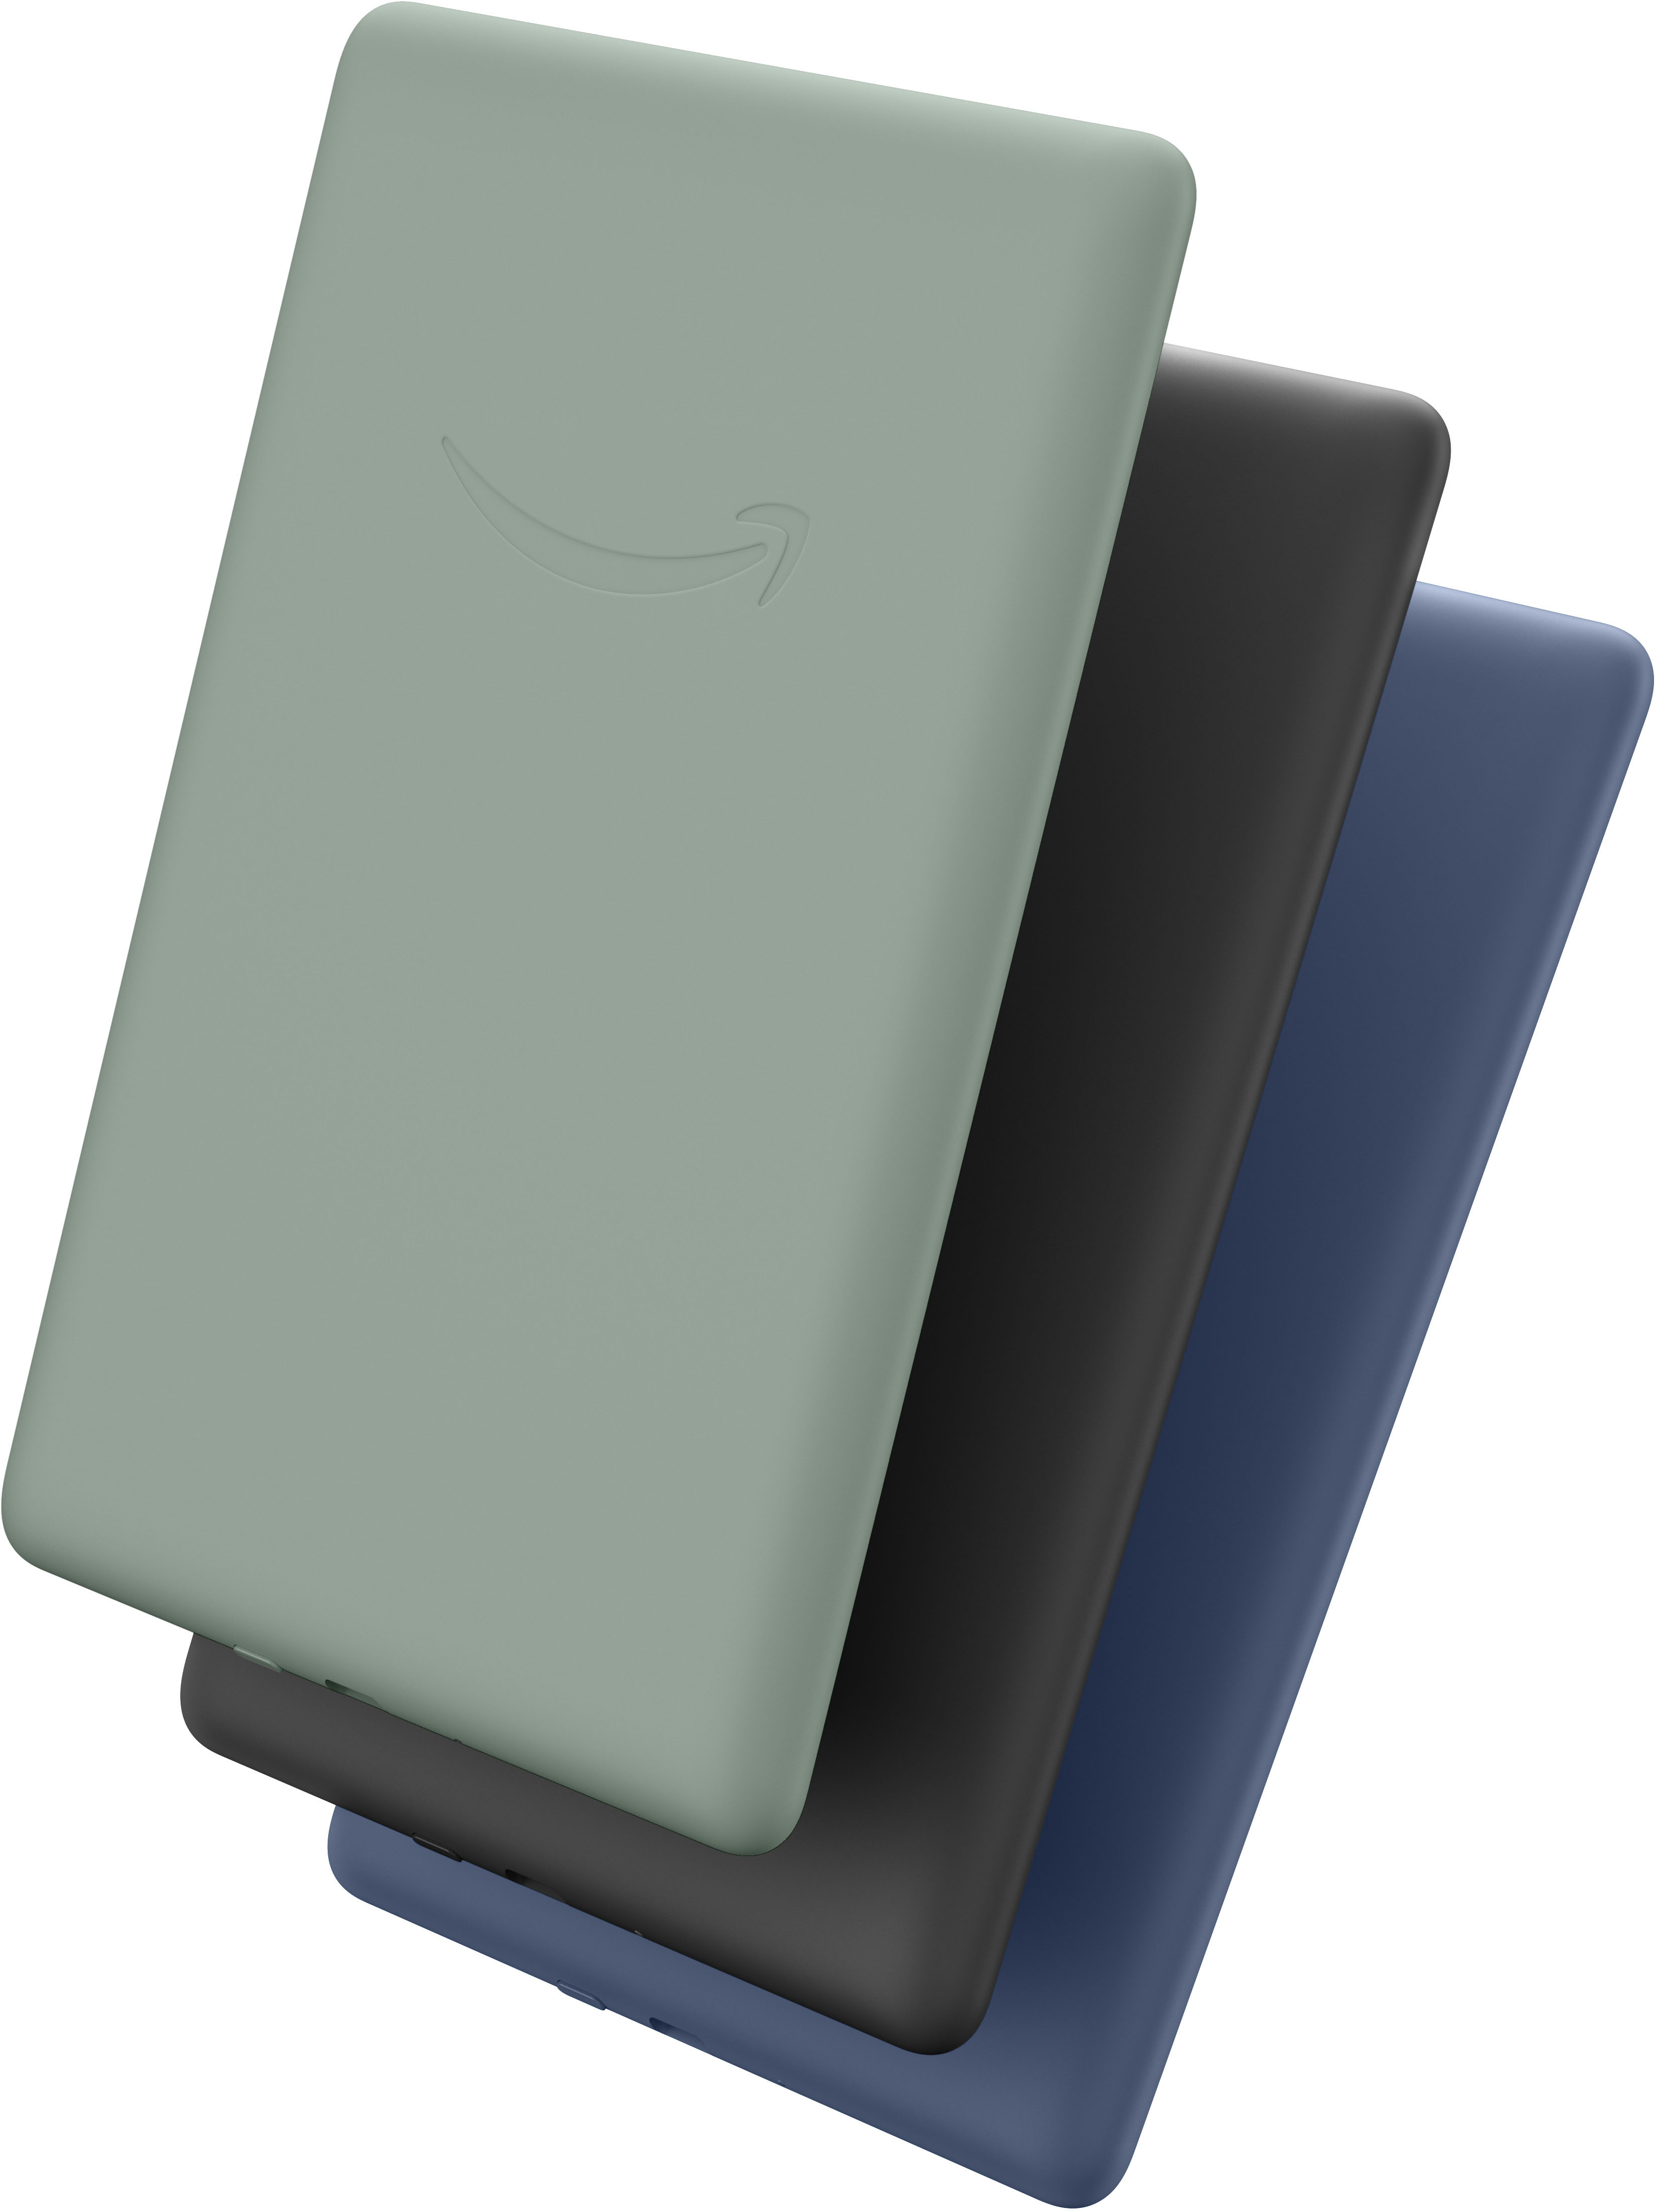 Amazon   Kindle Paperwhite – GB      Agave Green   National